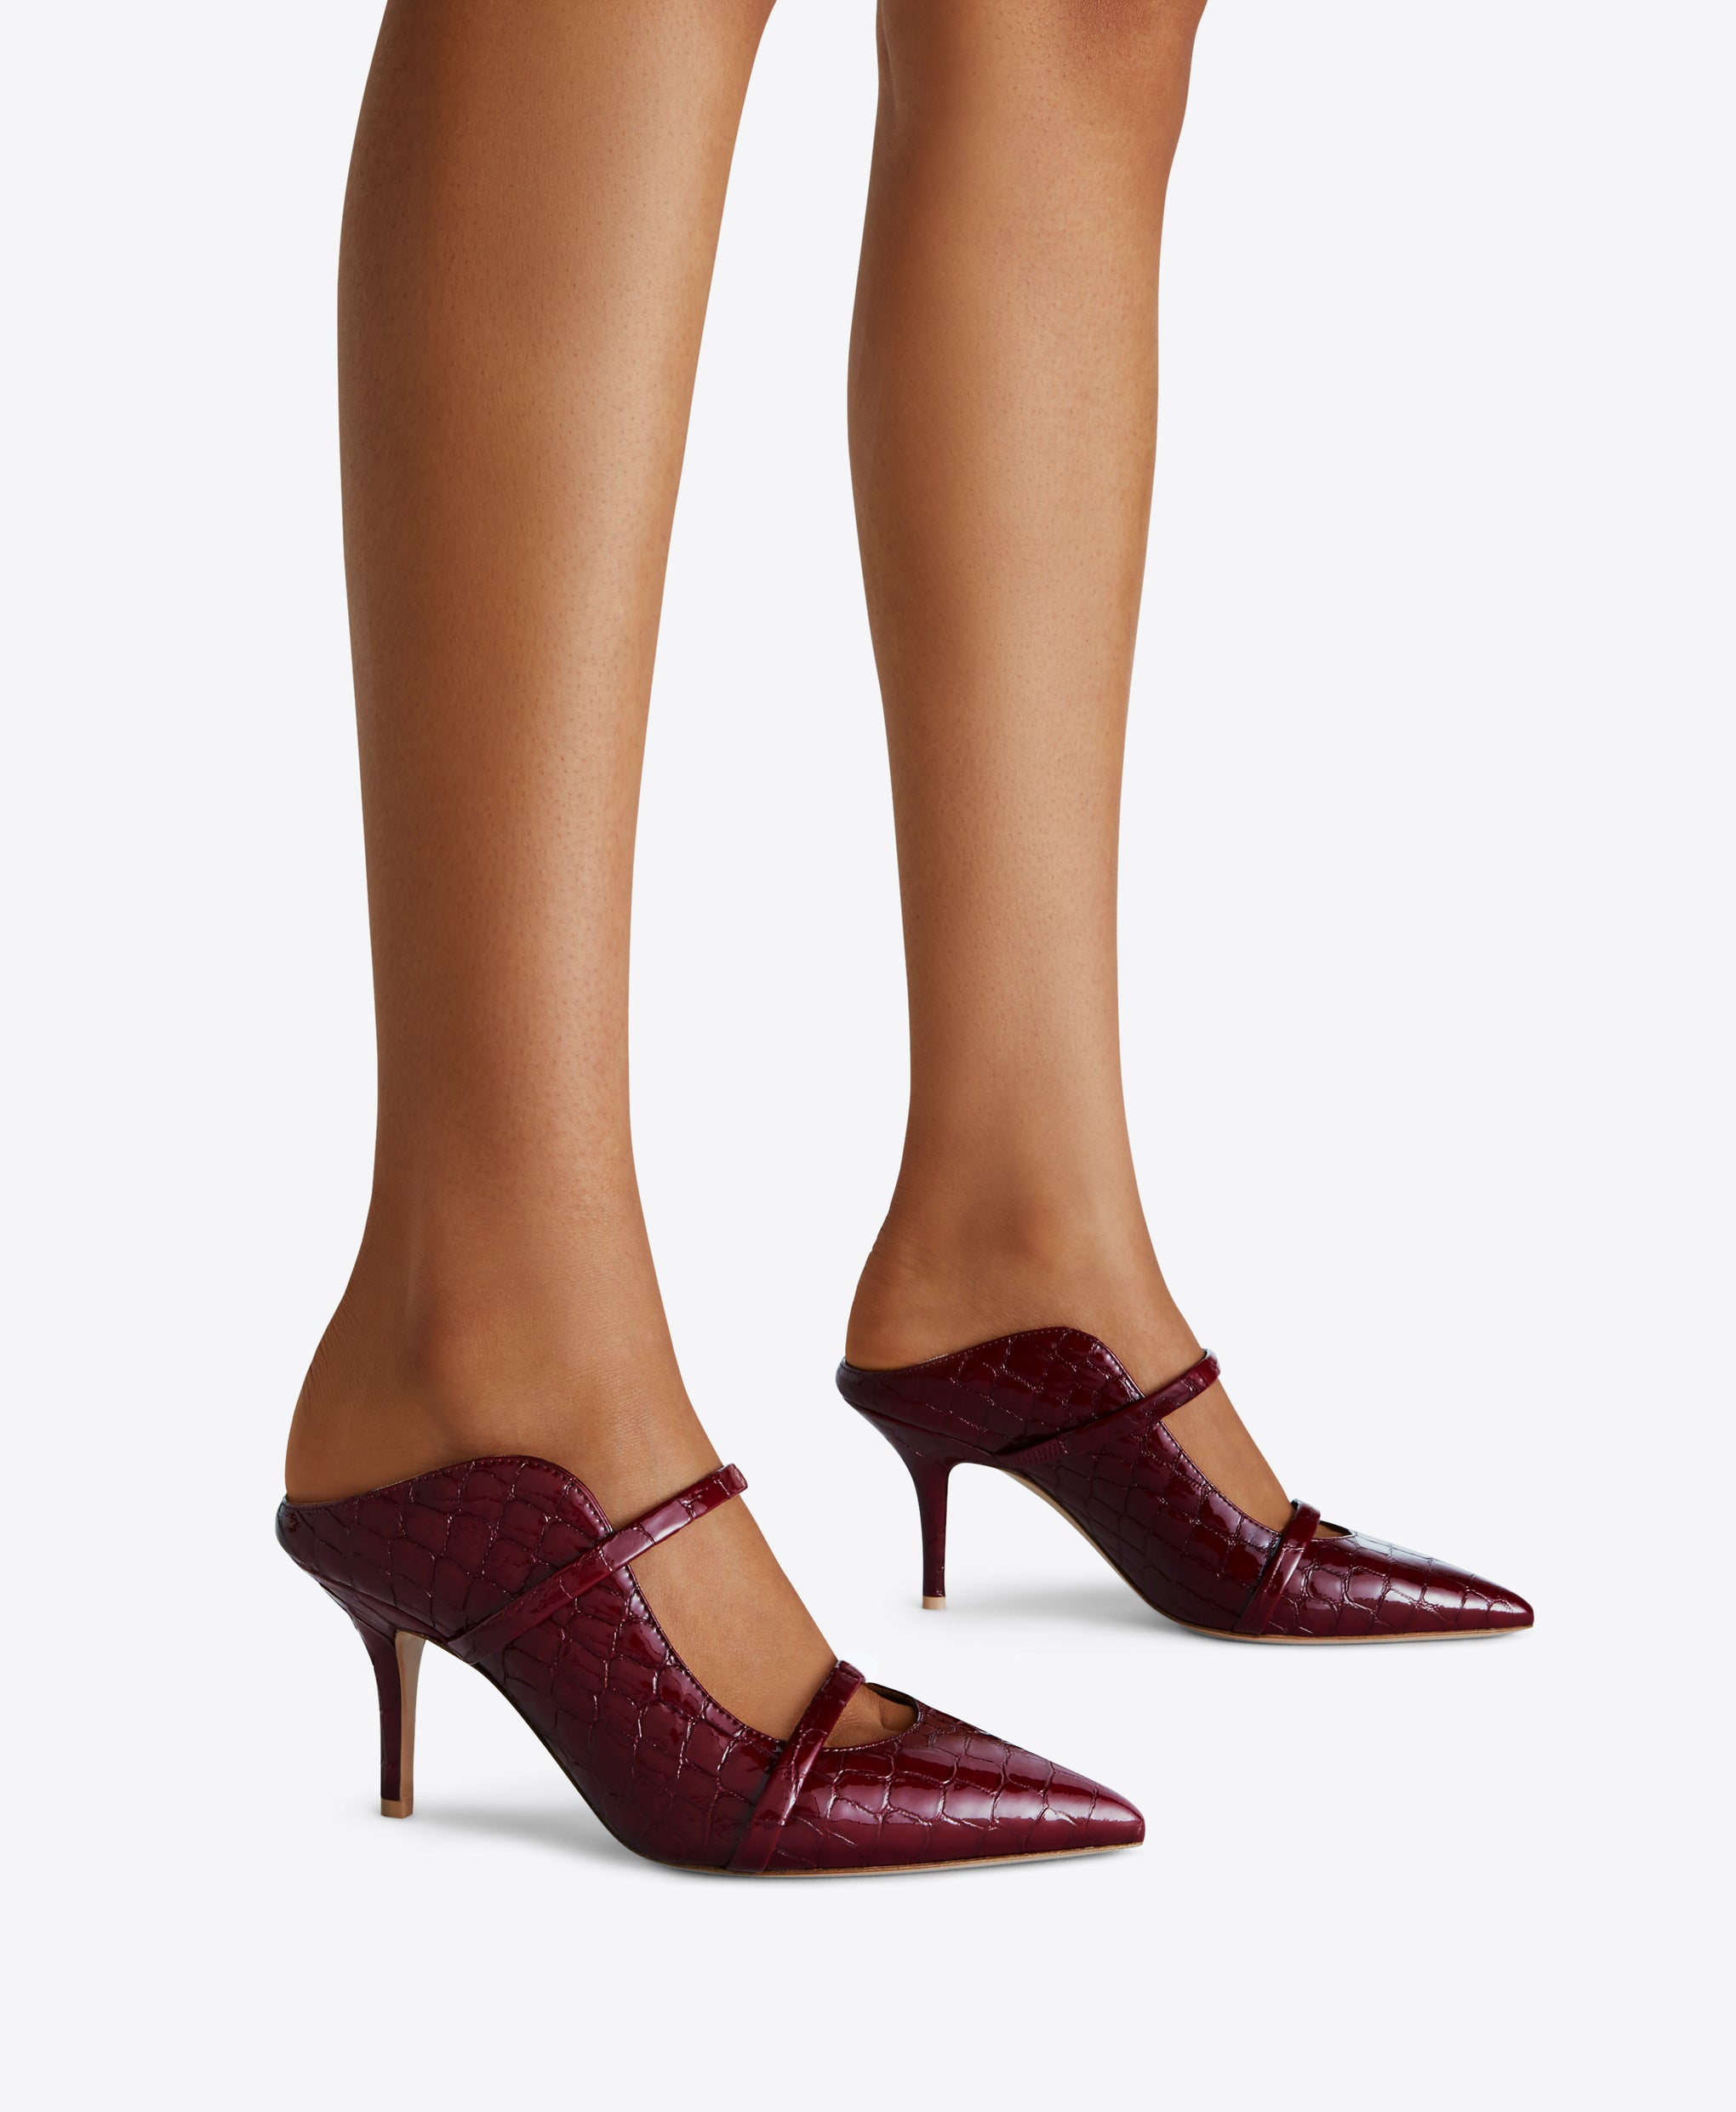 Pointed Toe Stiletto Mules in Burgundy Embossed Patent - Double Straps | Malone Souliers